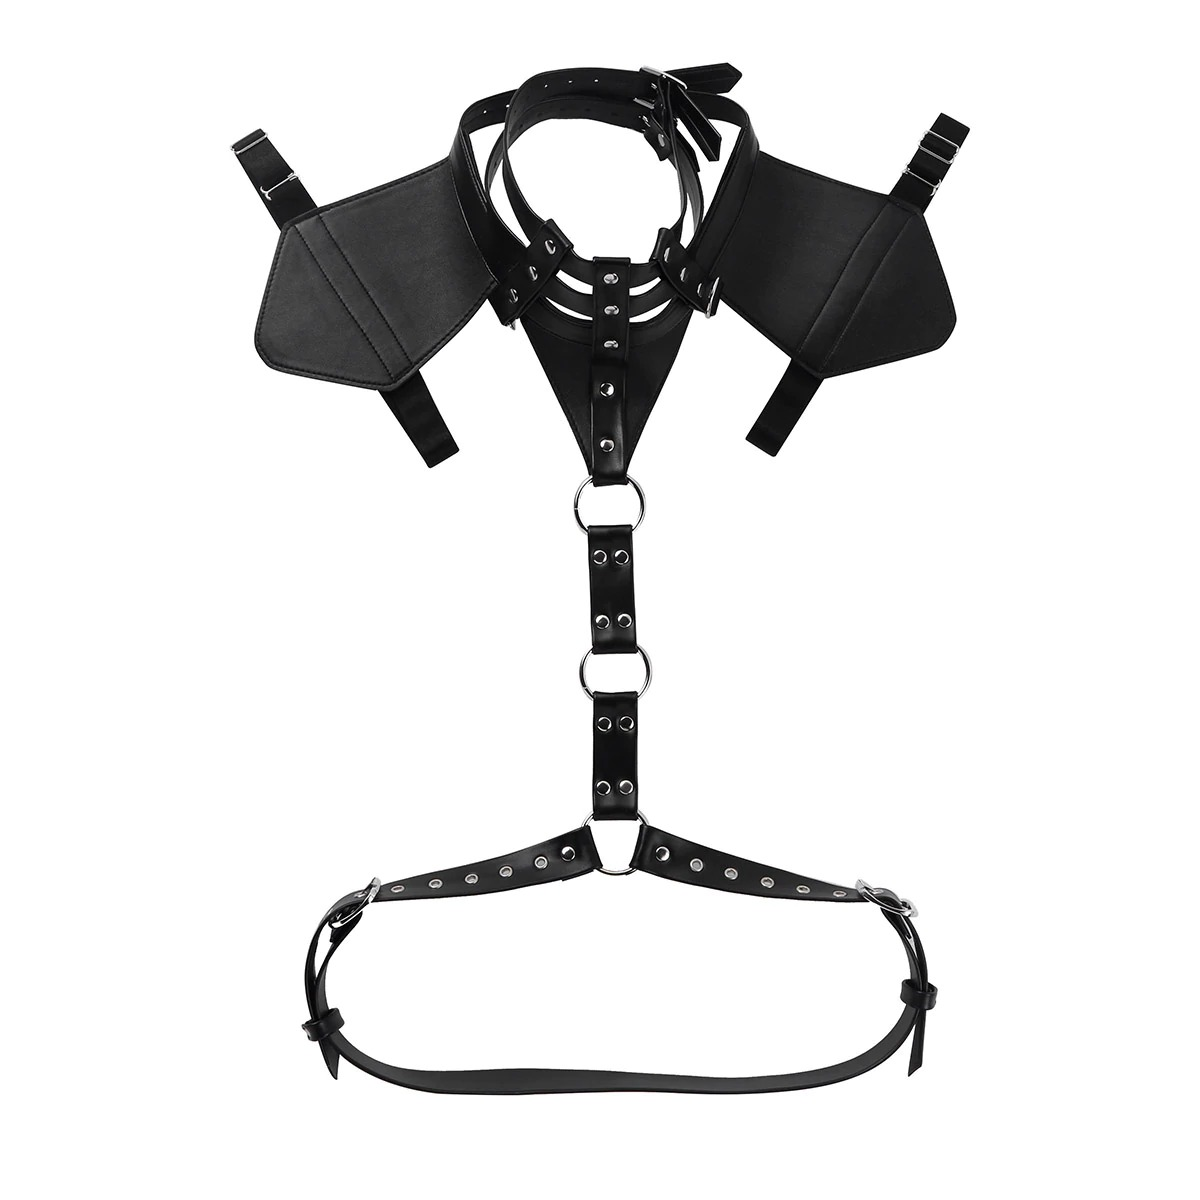 Faux Leather Body Chest Harness / Slim Fit Top Harness / Male Cosplay Costume Bondage - EVE's SECRETS